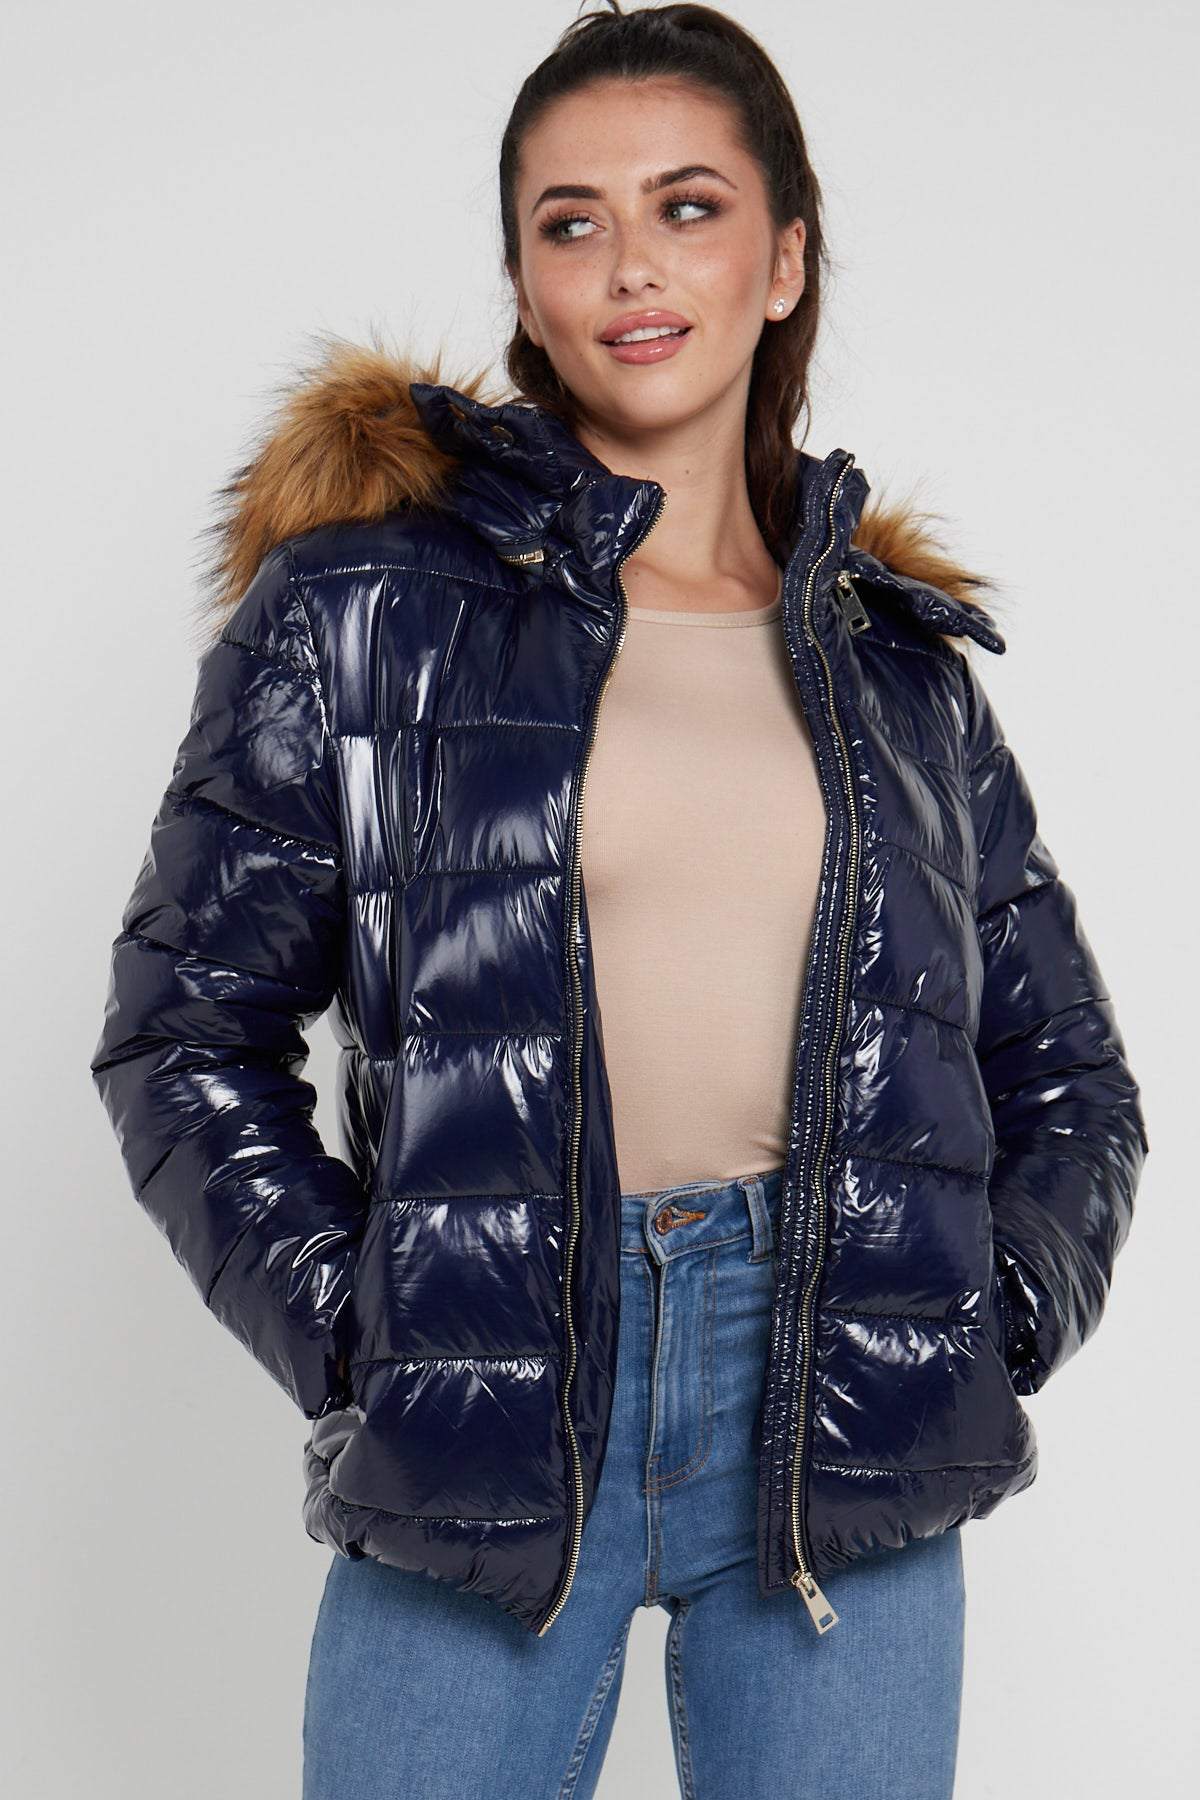 Wet Look Padded Jacket with Faux Fur Hood in Shiny Navy – LOVE SUNSHINE